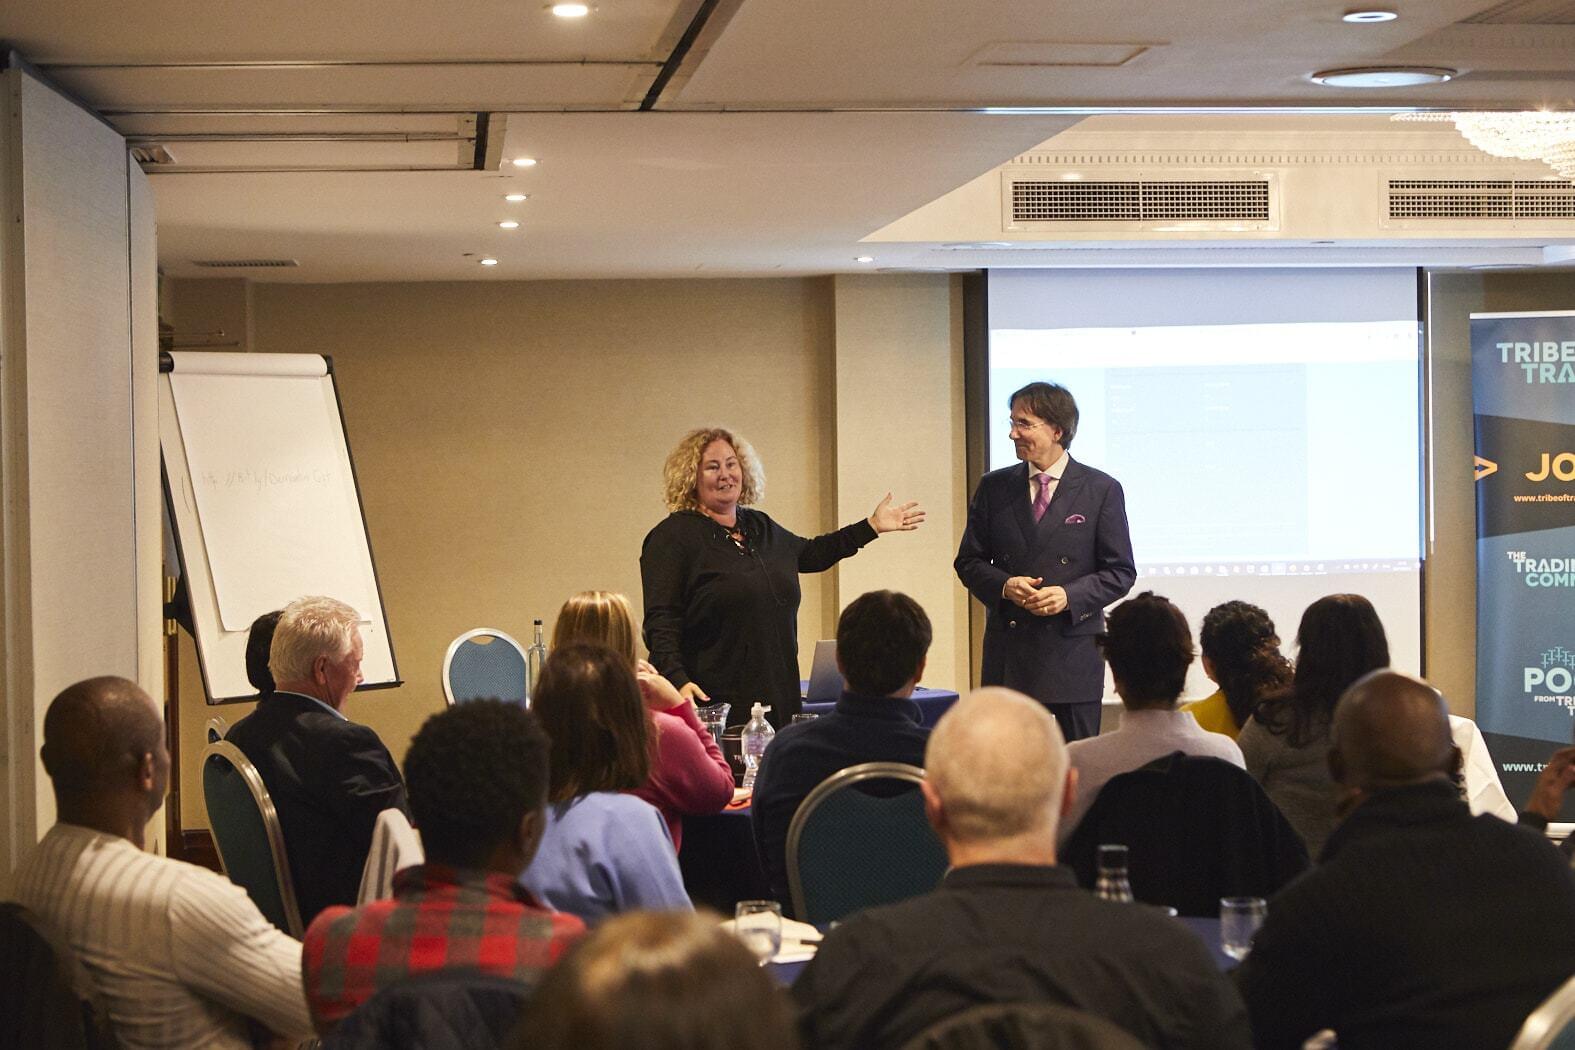 On stage with JudyVee and Dr John Demartini